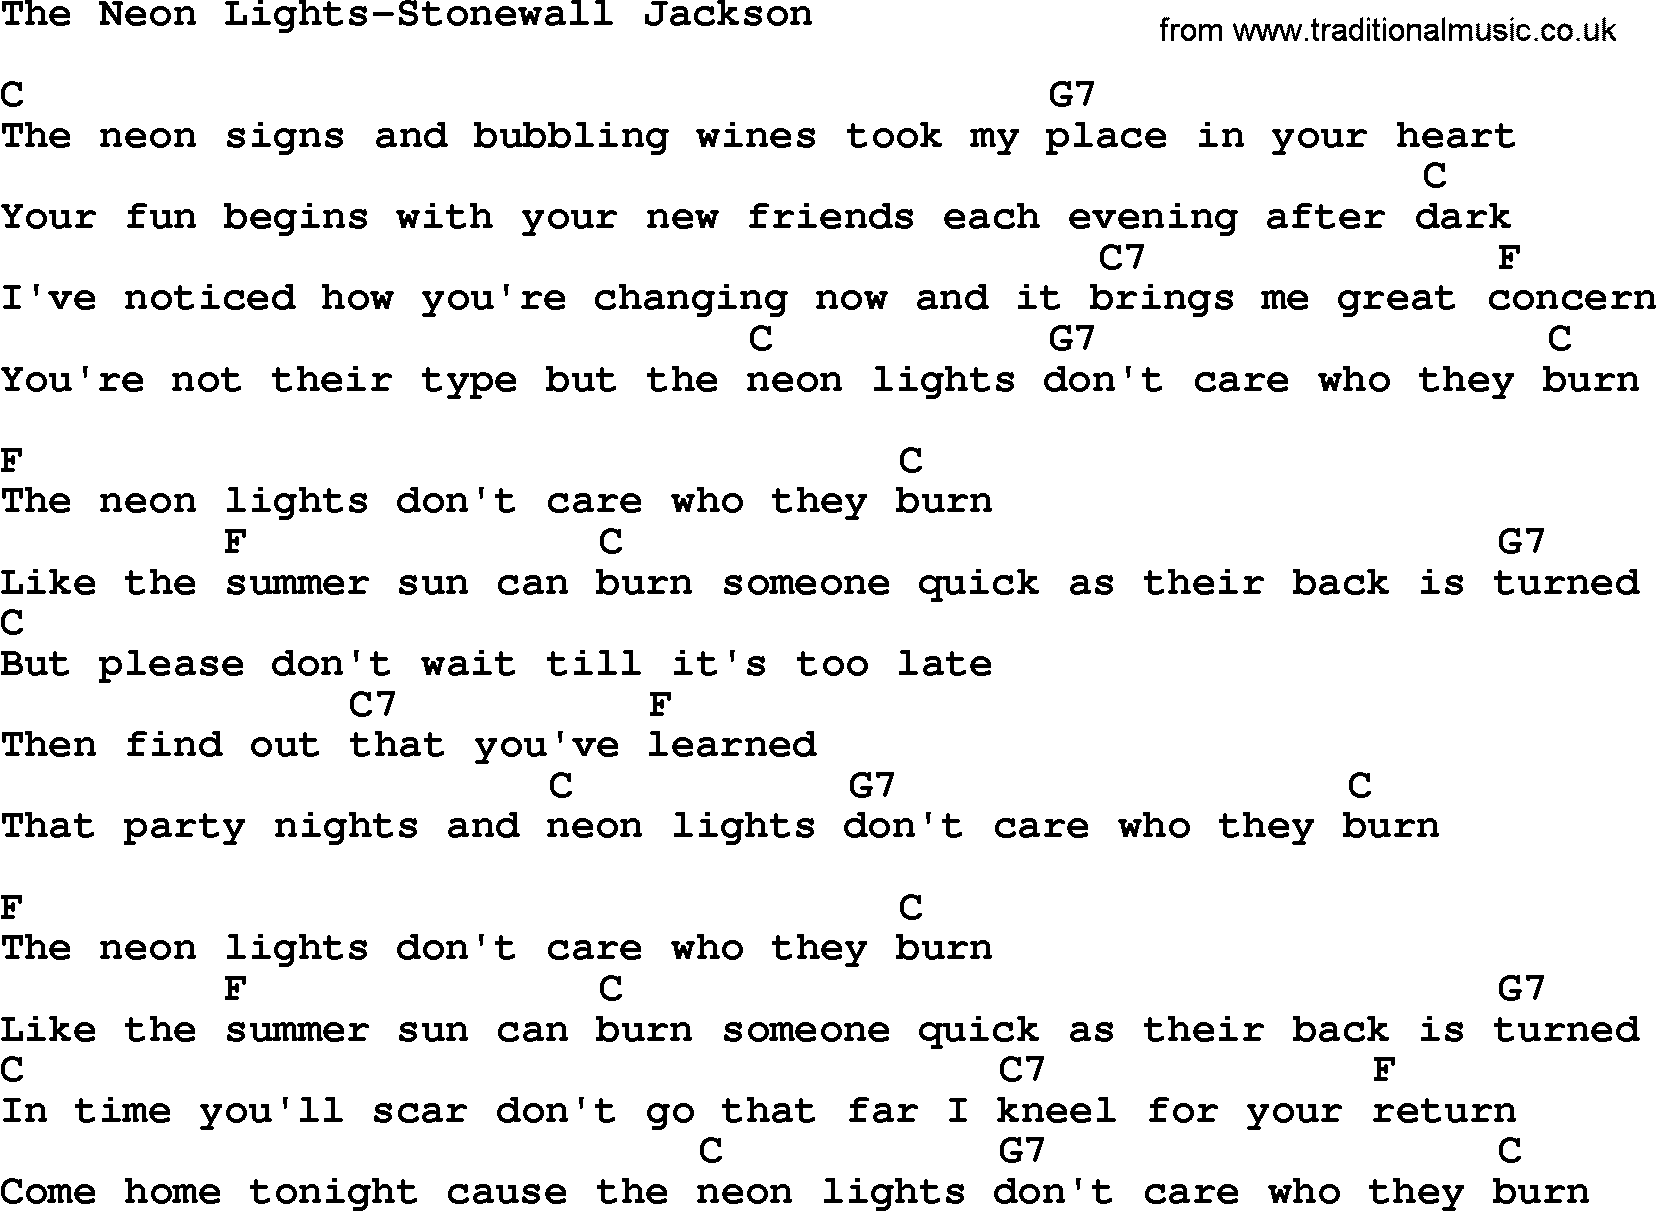 Country music song: The Neon Lights-Stonewall Jackson lyrics and chords